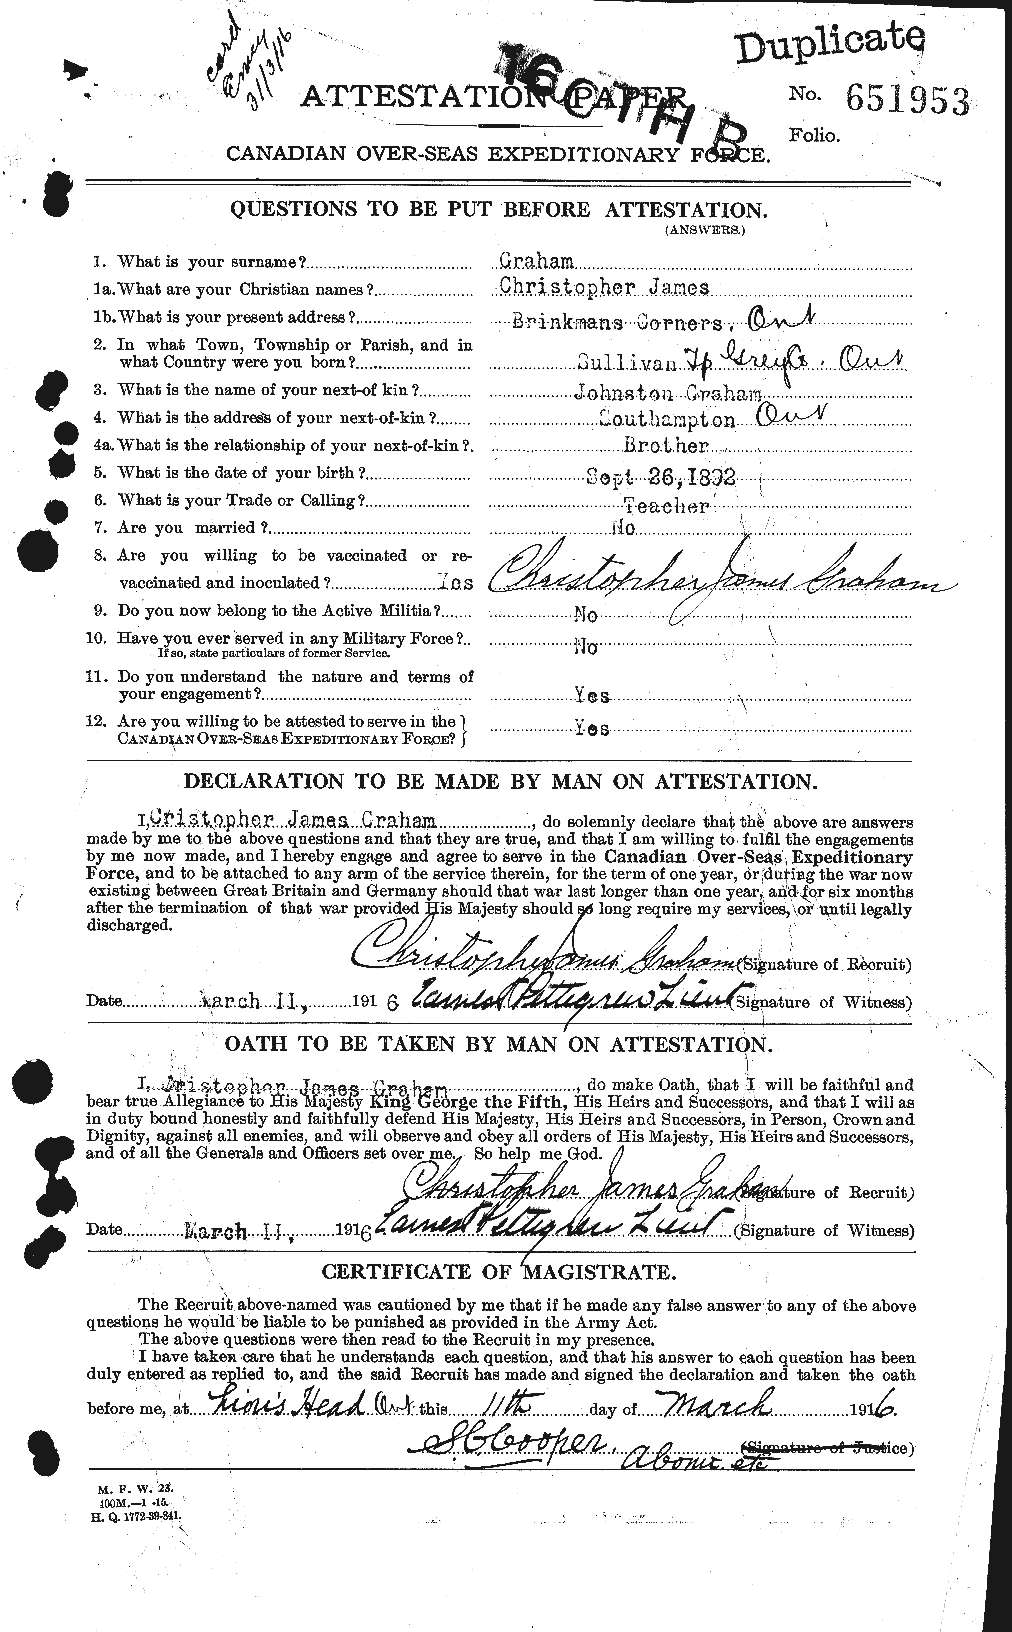 Personnel Records of the First World War - CEF 353794a